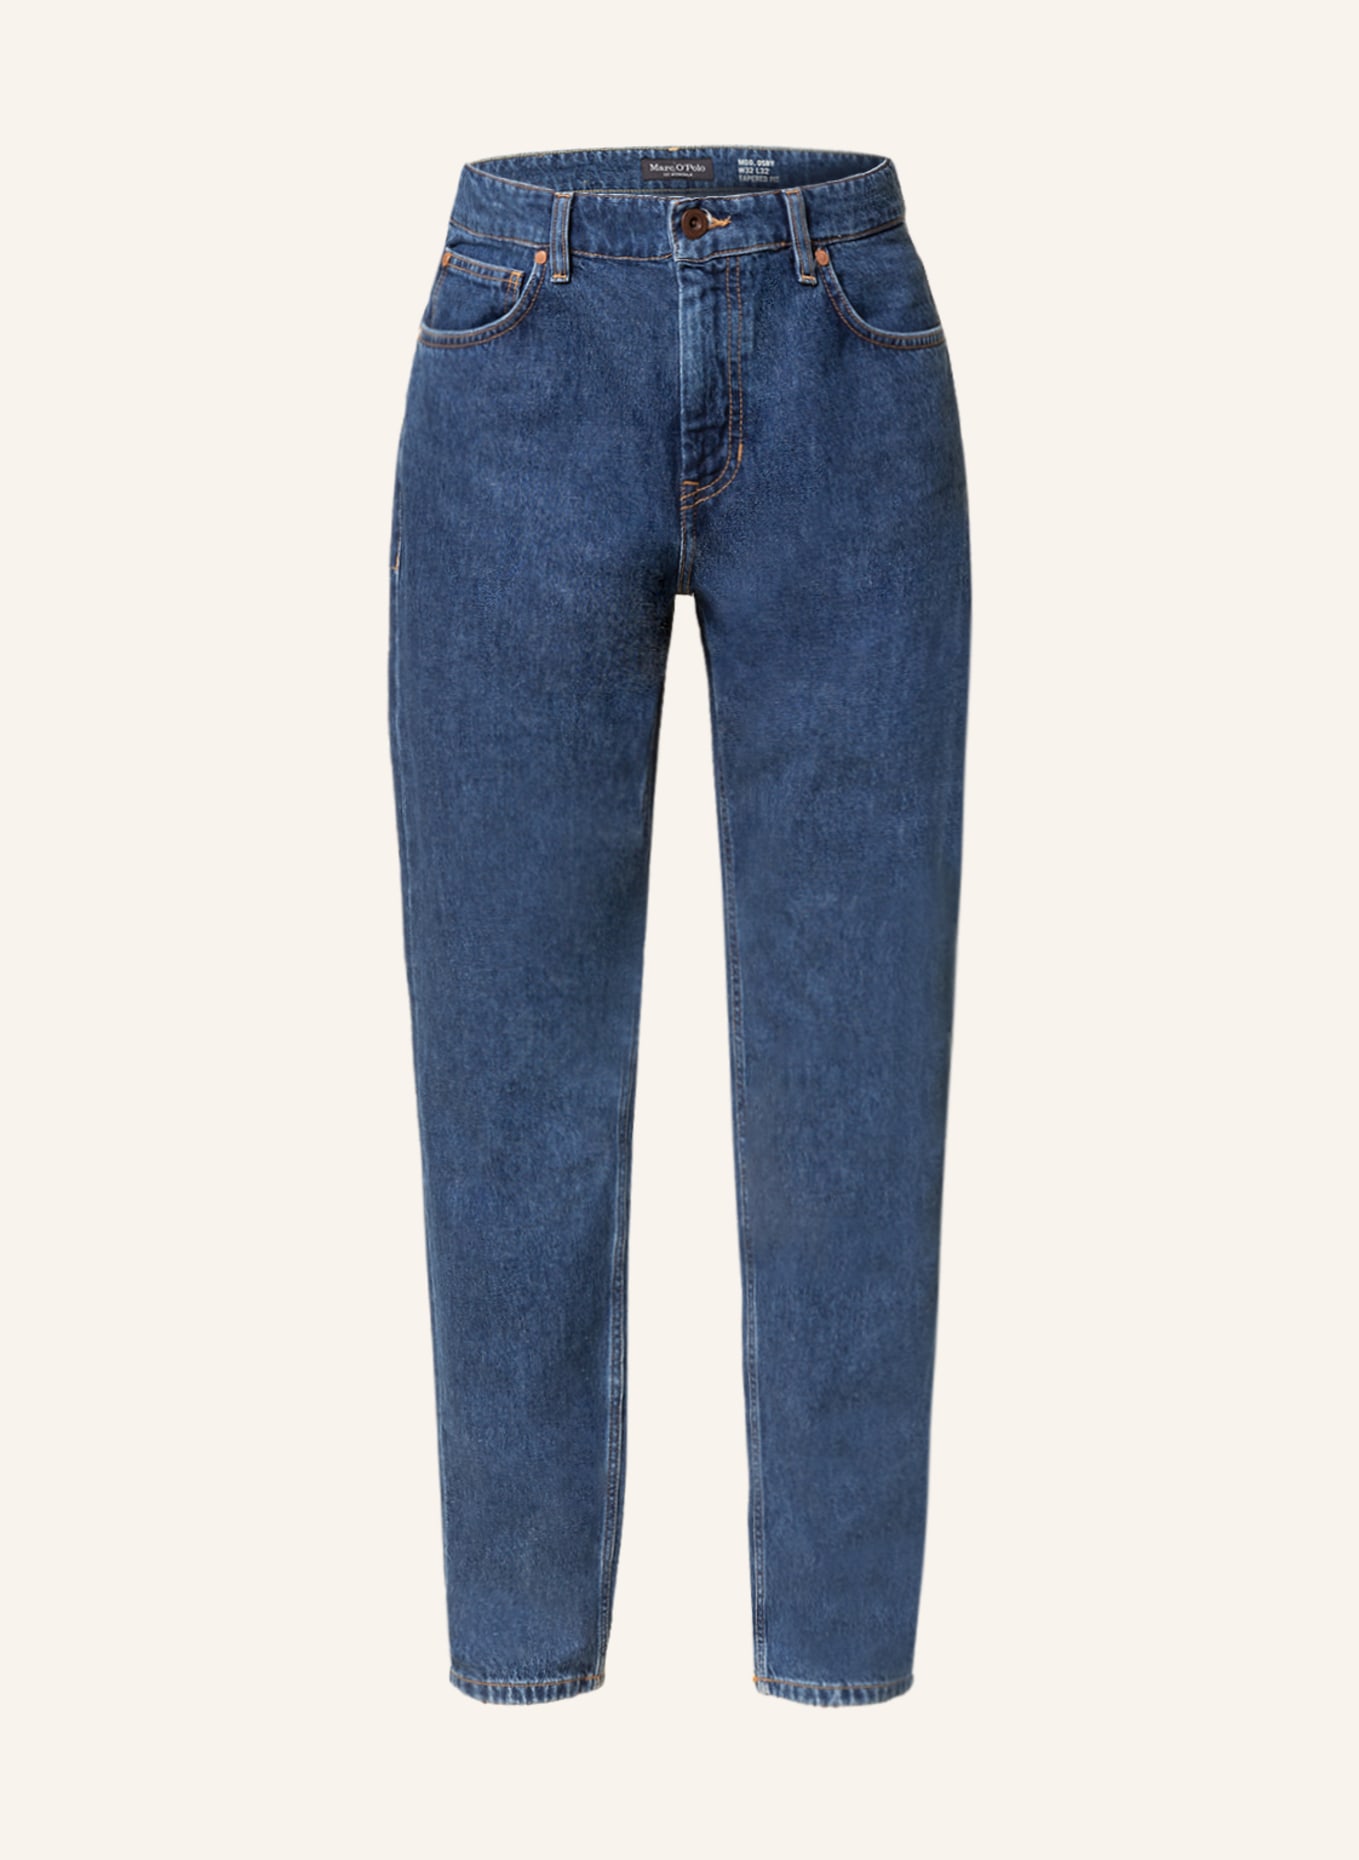 Marc O'Polo Jeans OSBY Tapered Fit, Farbe: 042 mid blue authentic salt'n pepp (Bild 1)